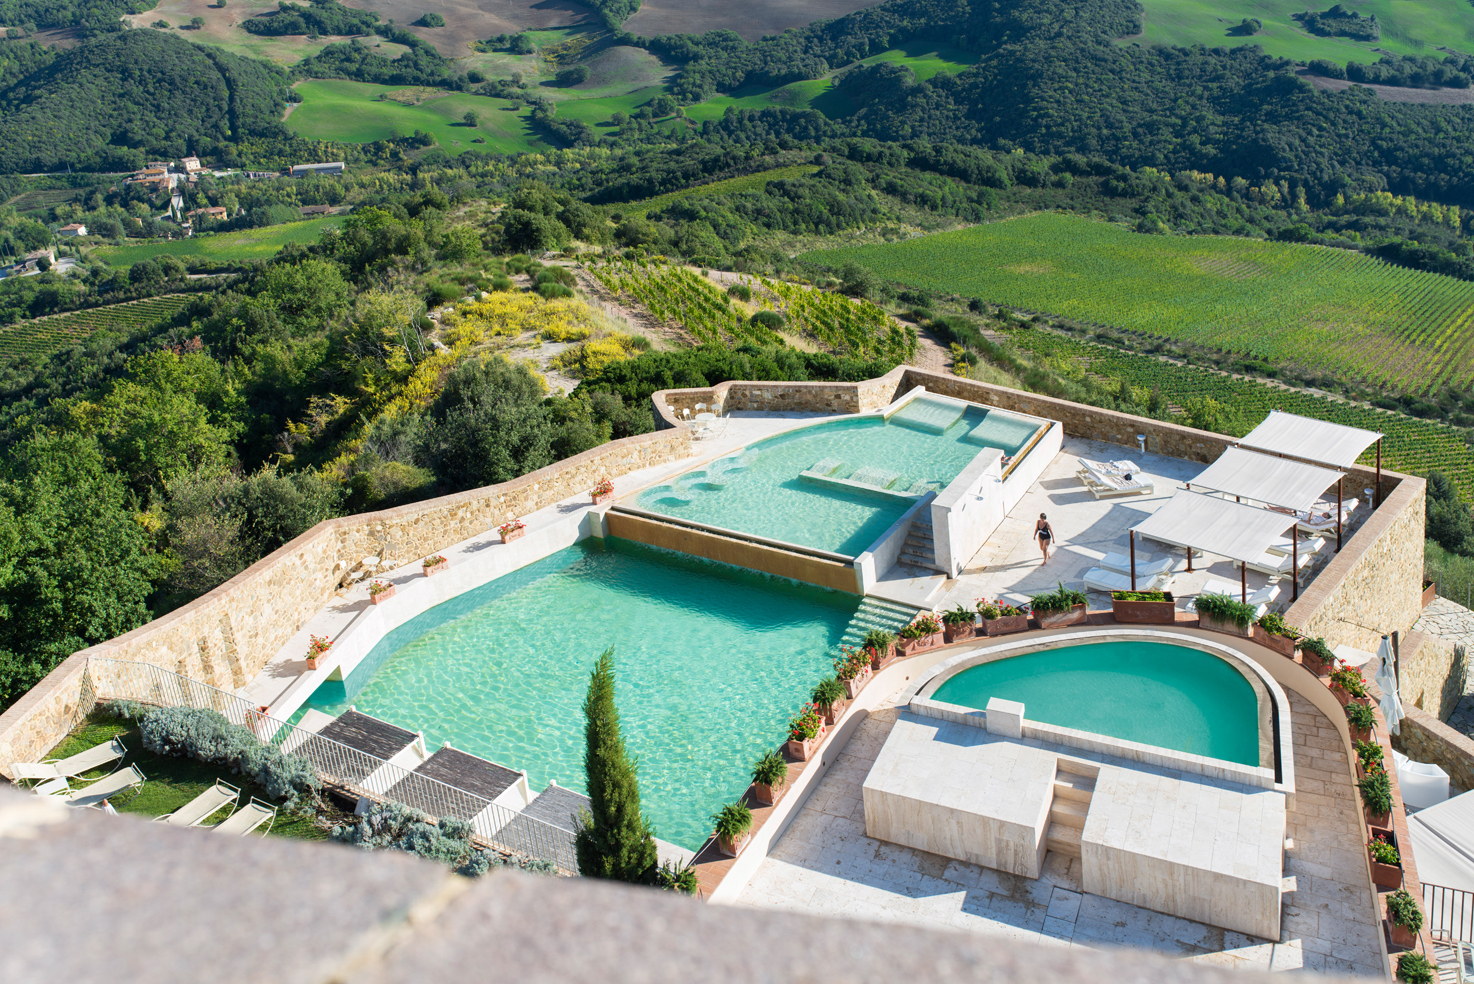 Aerial view of the pools